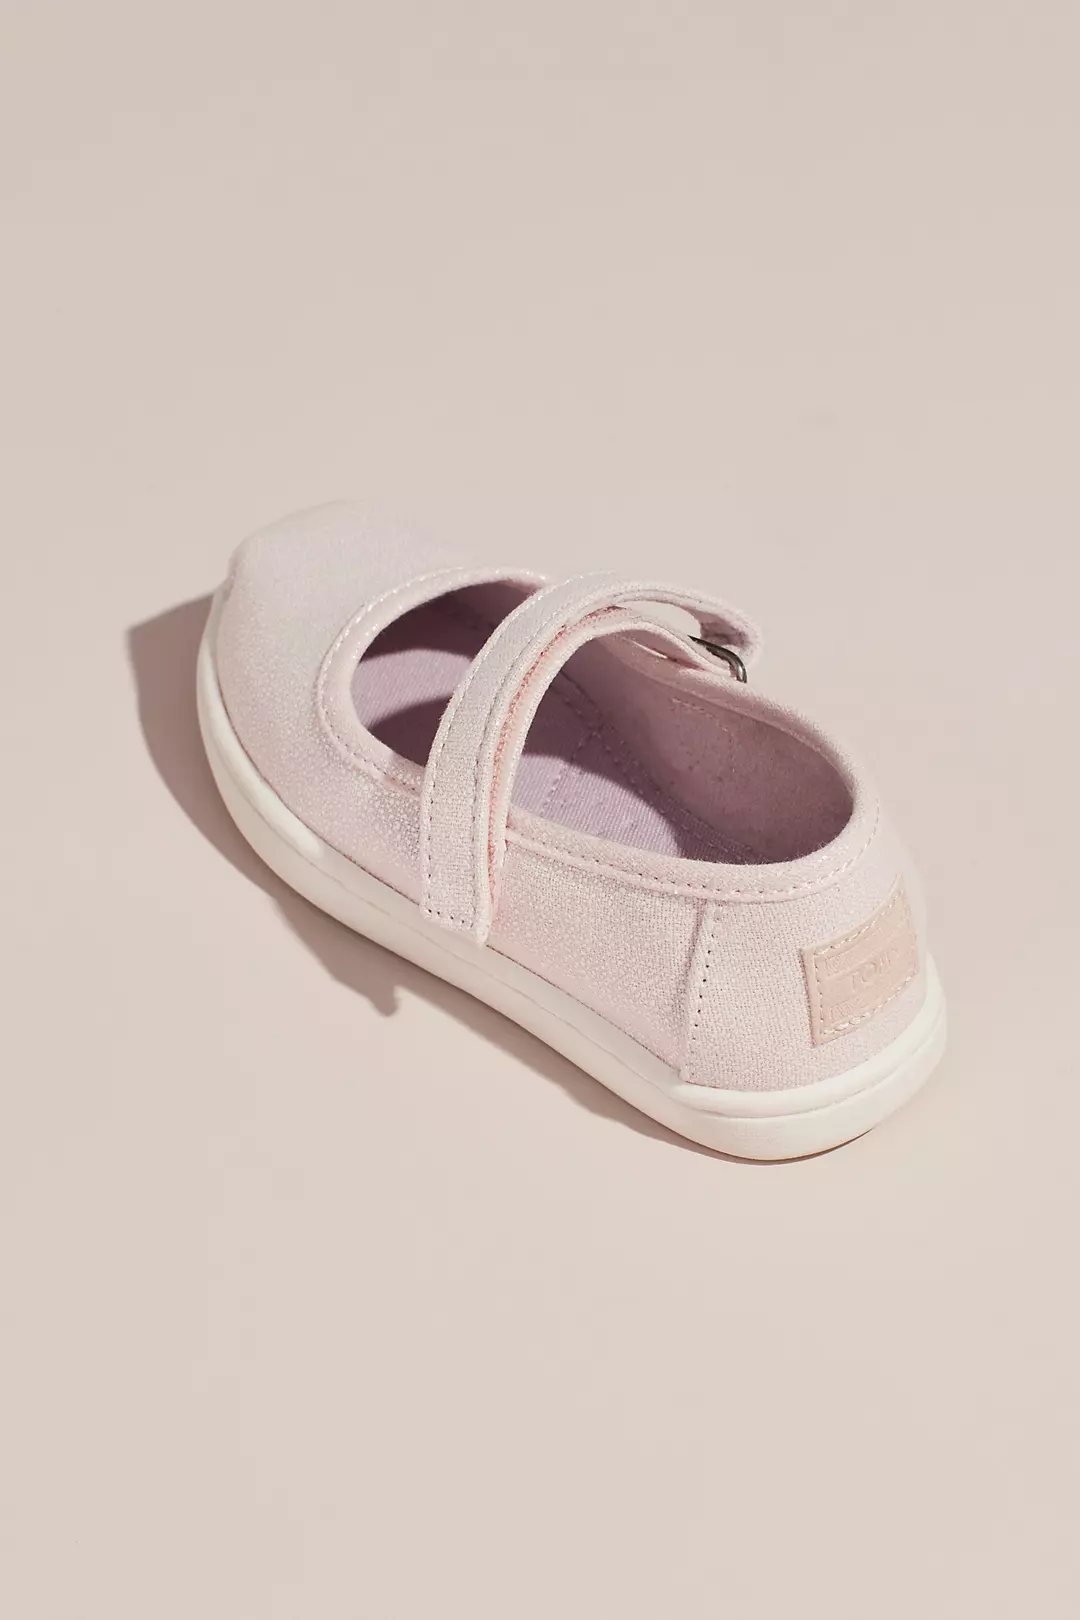 TOMS Girls Pearlized Mary Janes Image 2